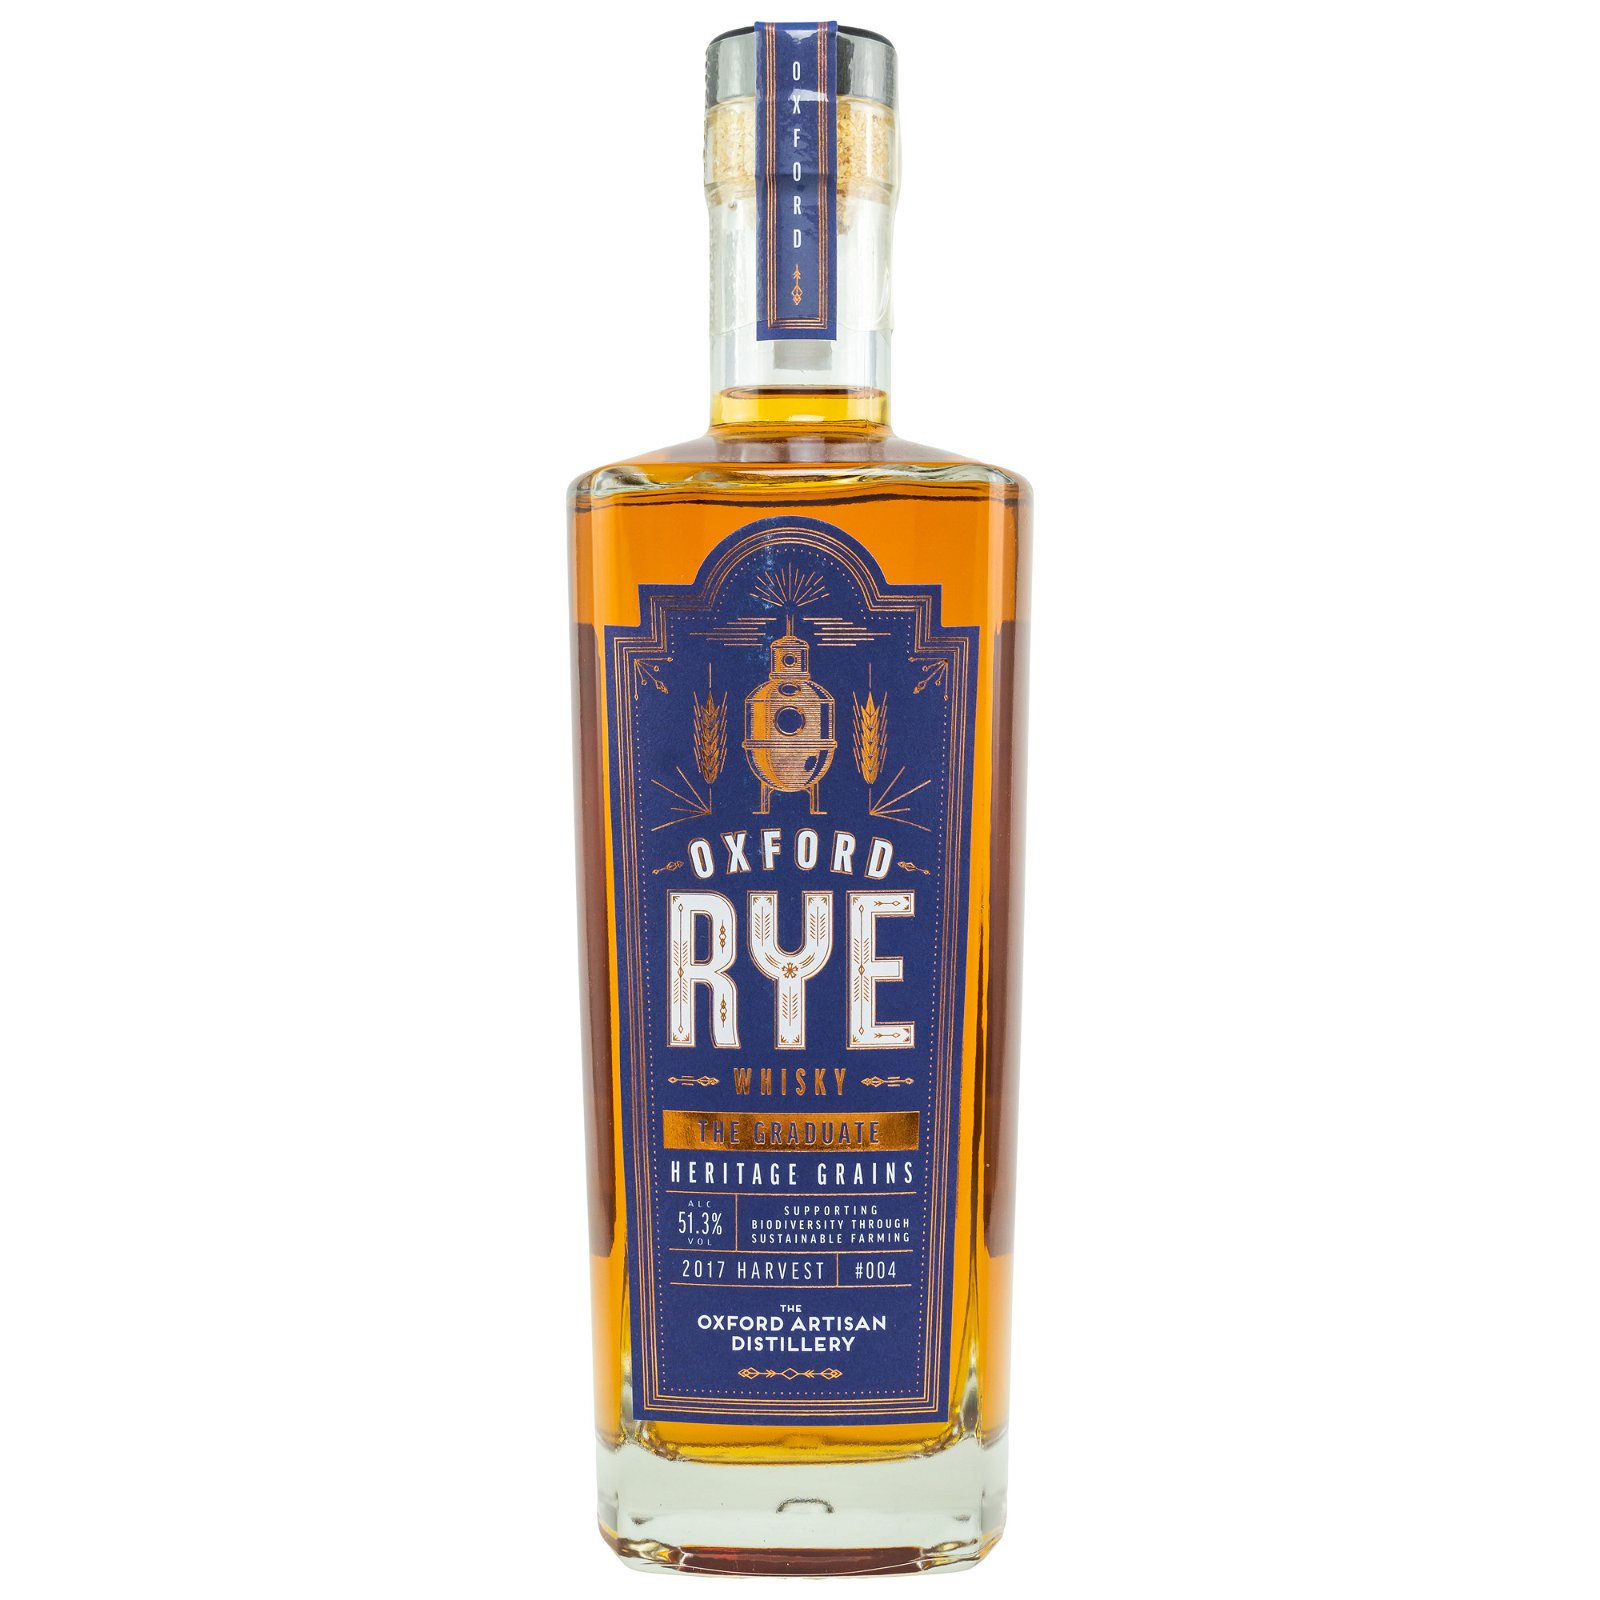 Oxford Rye Whisky #4 The Graduate